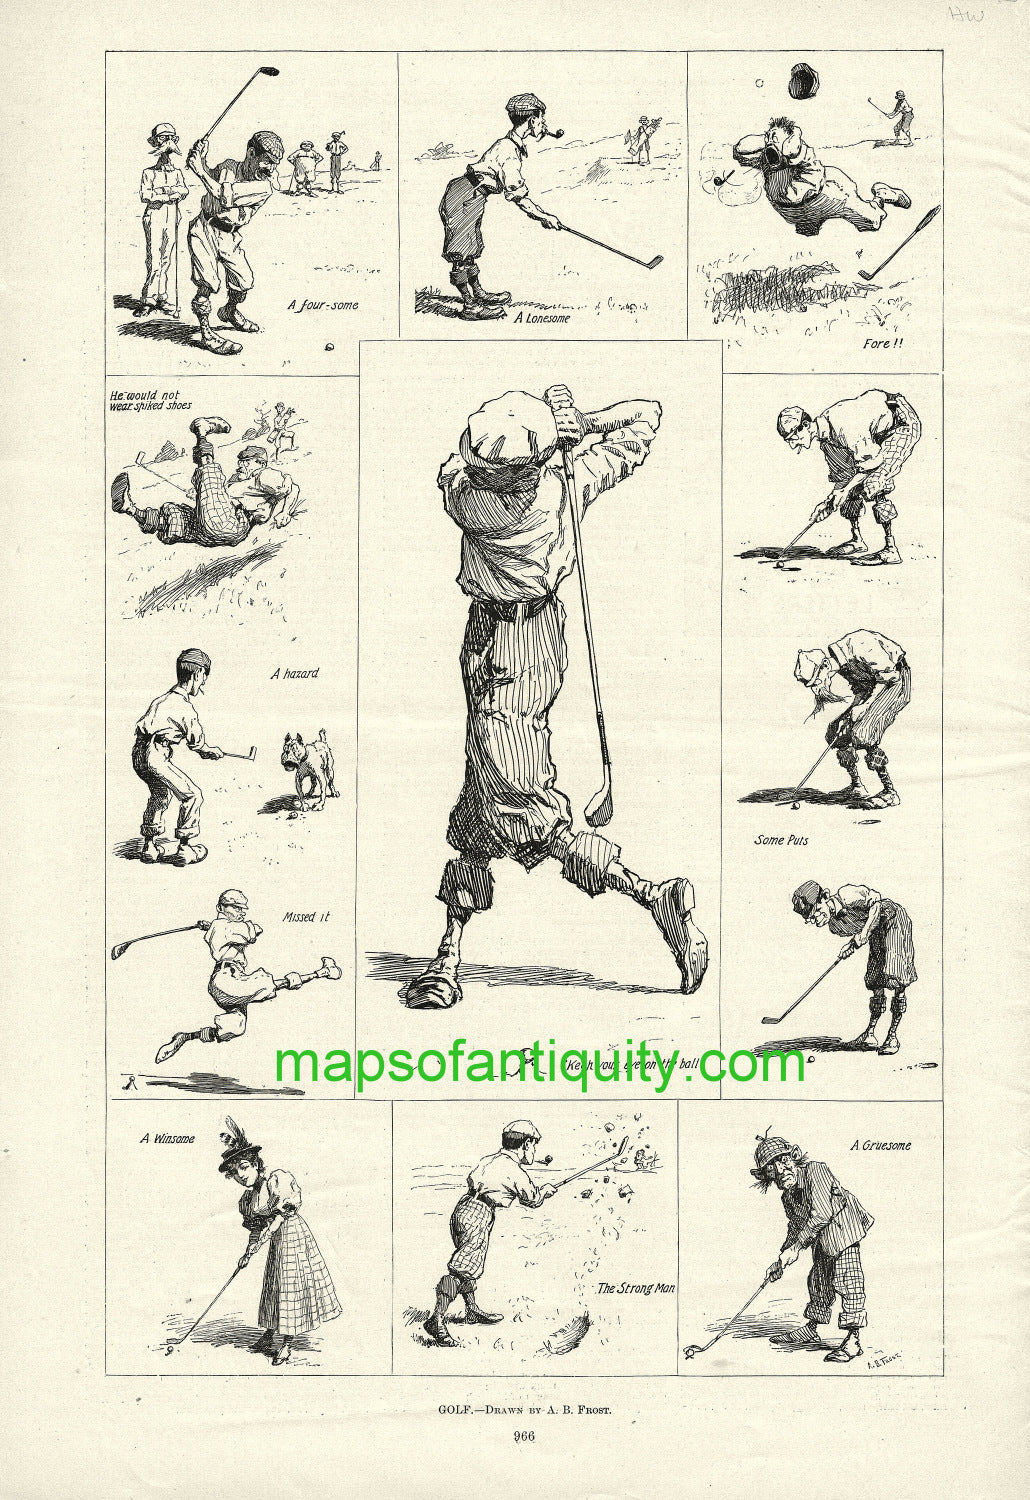 Black-and-White-Antique-Illustration-Golf-antique-illustration-**********-Antique-Prints-Sports-Prints-1895-Harper's-Weekly-Maps-Of-Antiquity